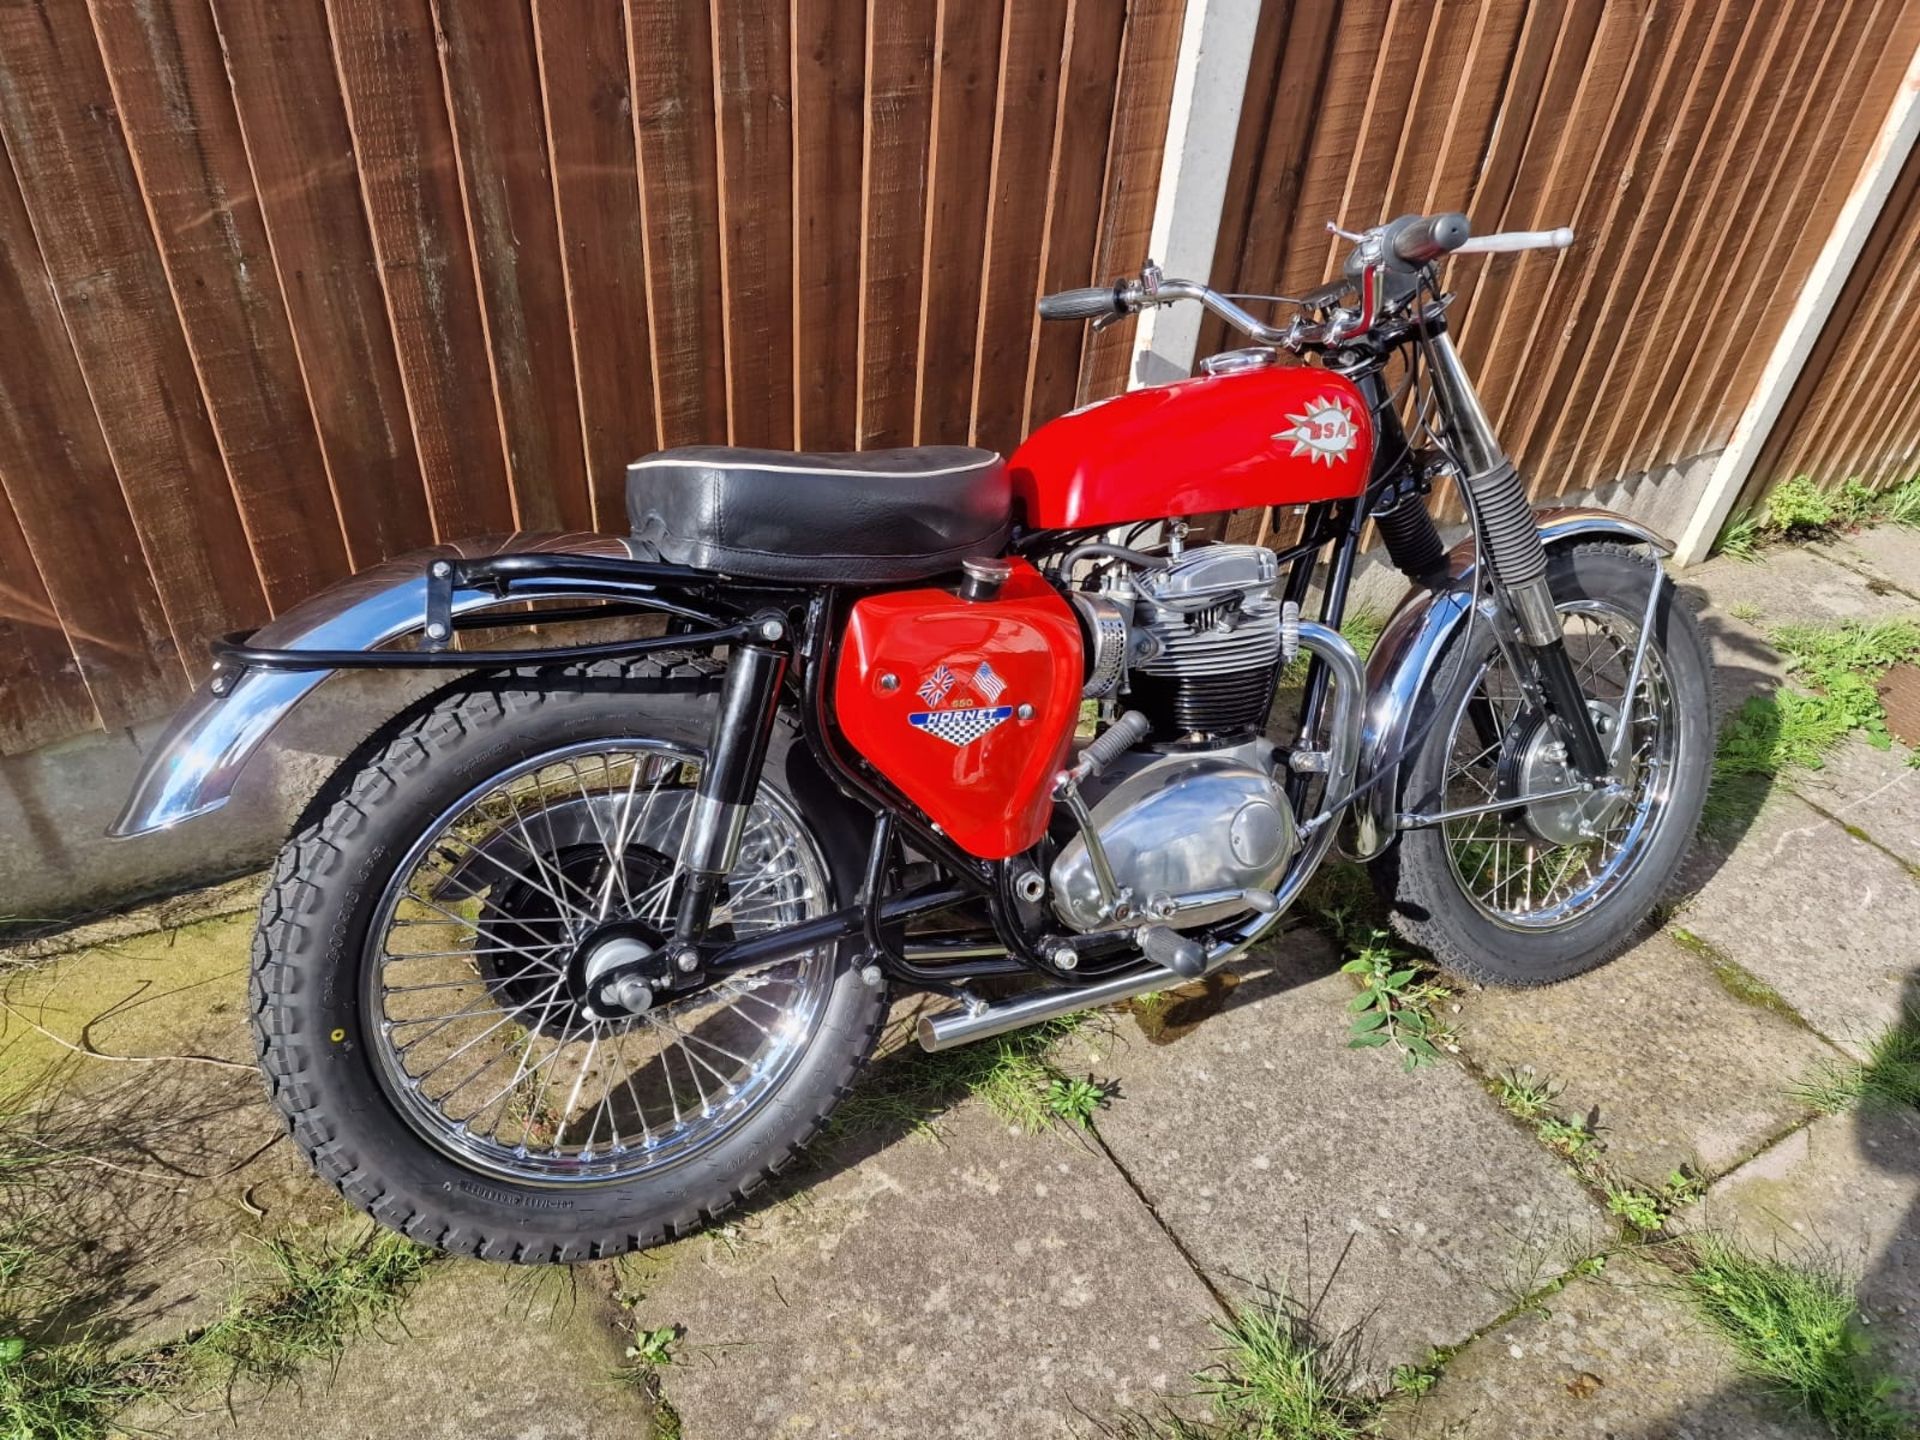 Bsa West Coast Hornet motorcycle. 1967. Recent restoration, very correct with WM3 front wheel, - Image 3 of 3